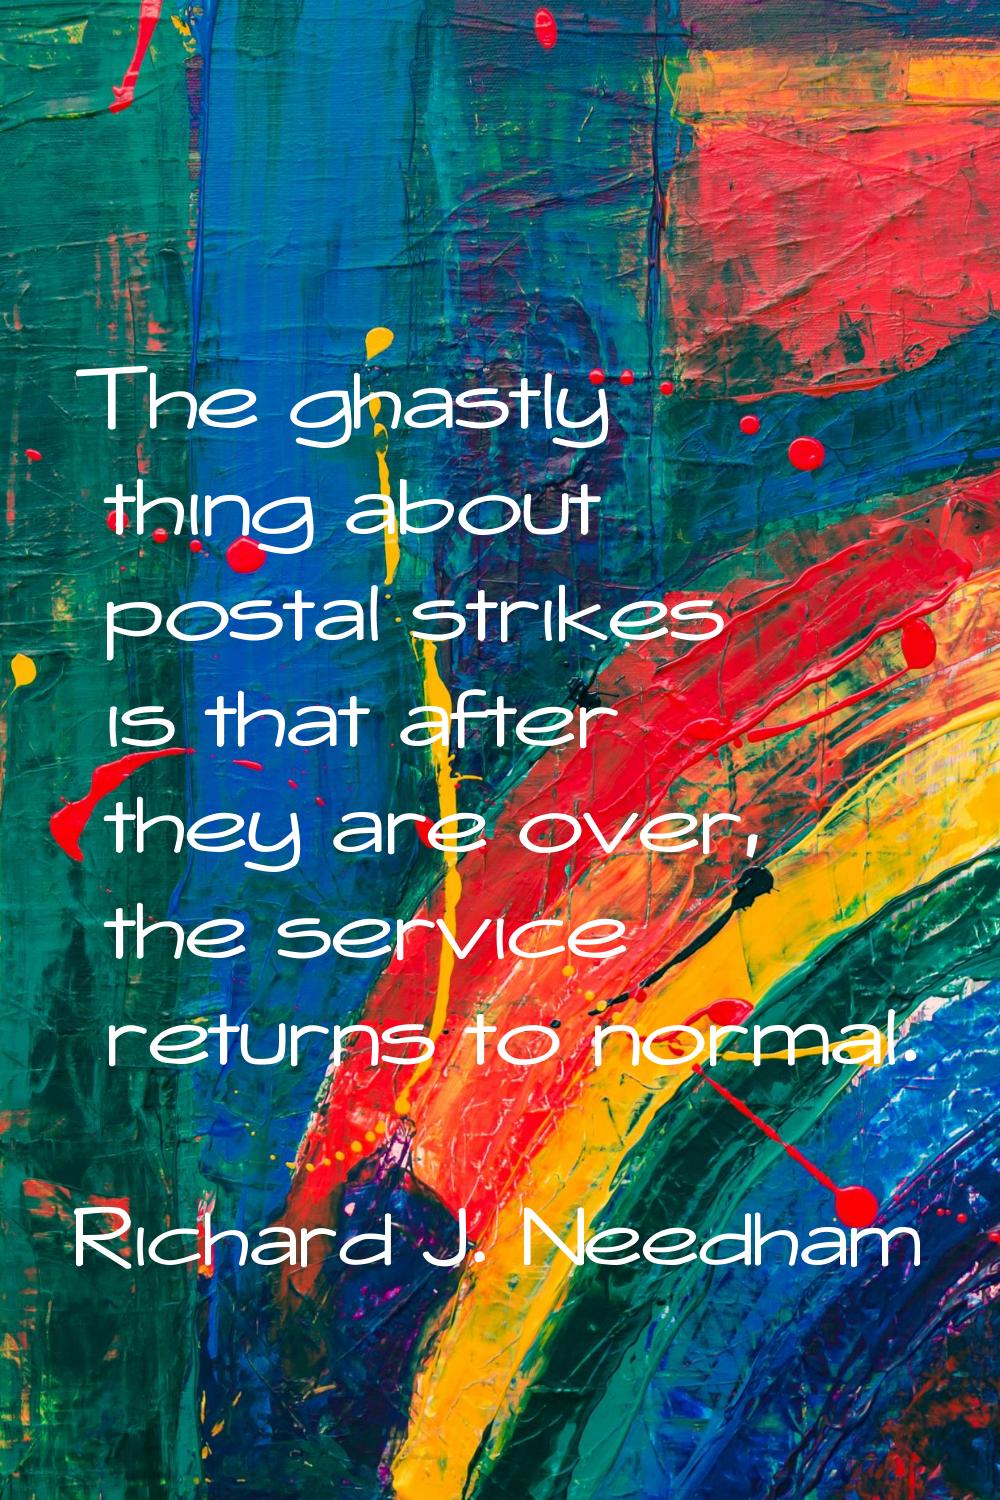 The ghastly thing about postal strikes is that after they are over, the service returns to normal.